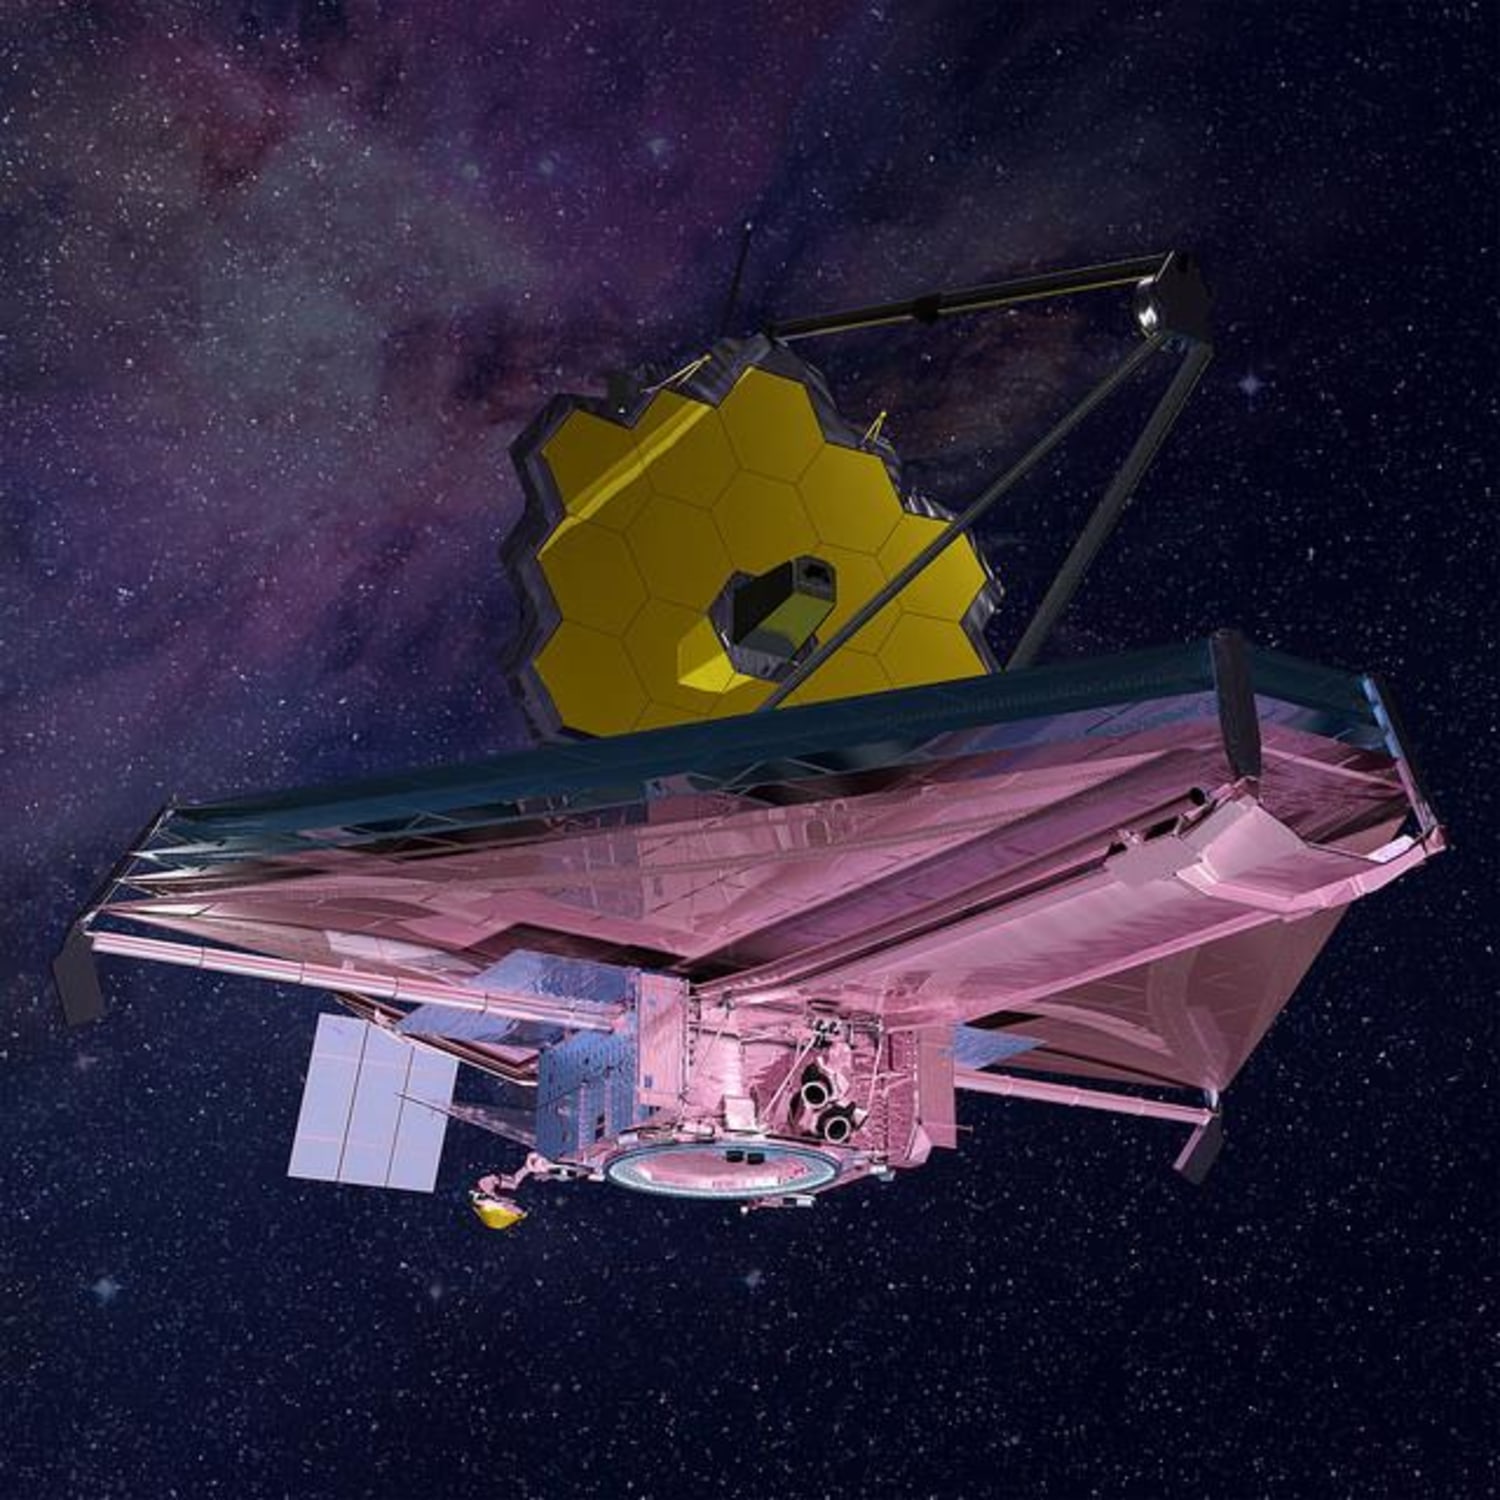 Hubble Successor James Webb Space Telescope on Track for 2018 Launch